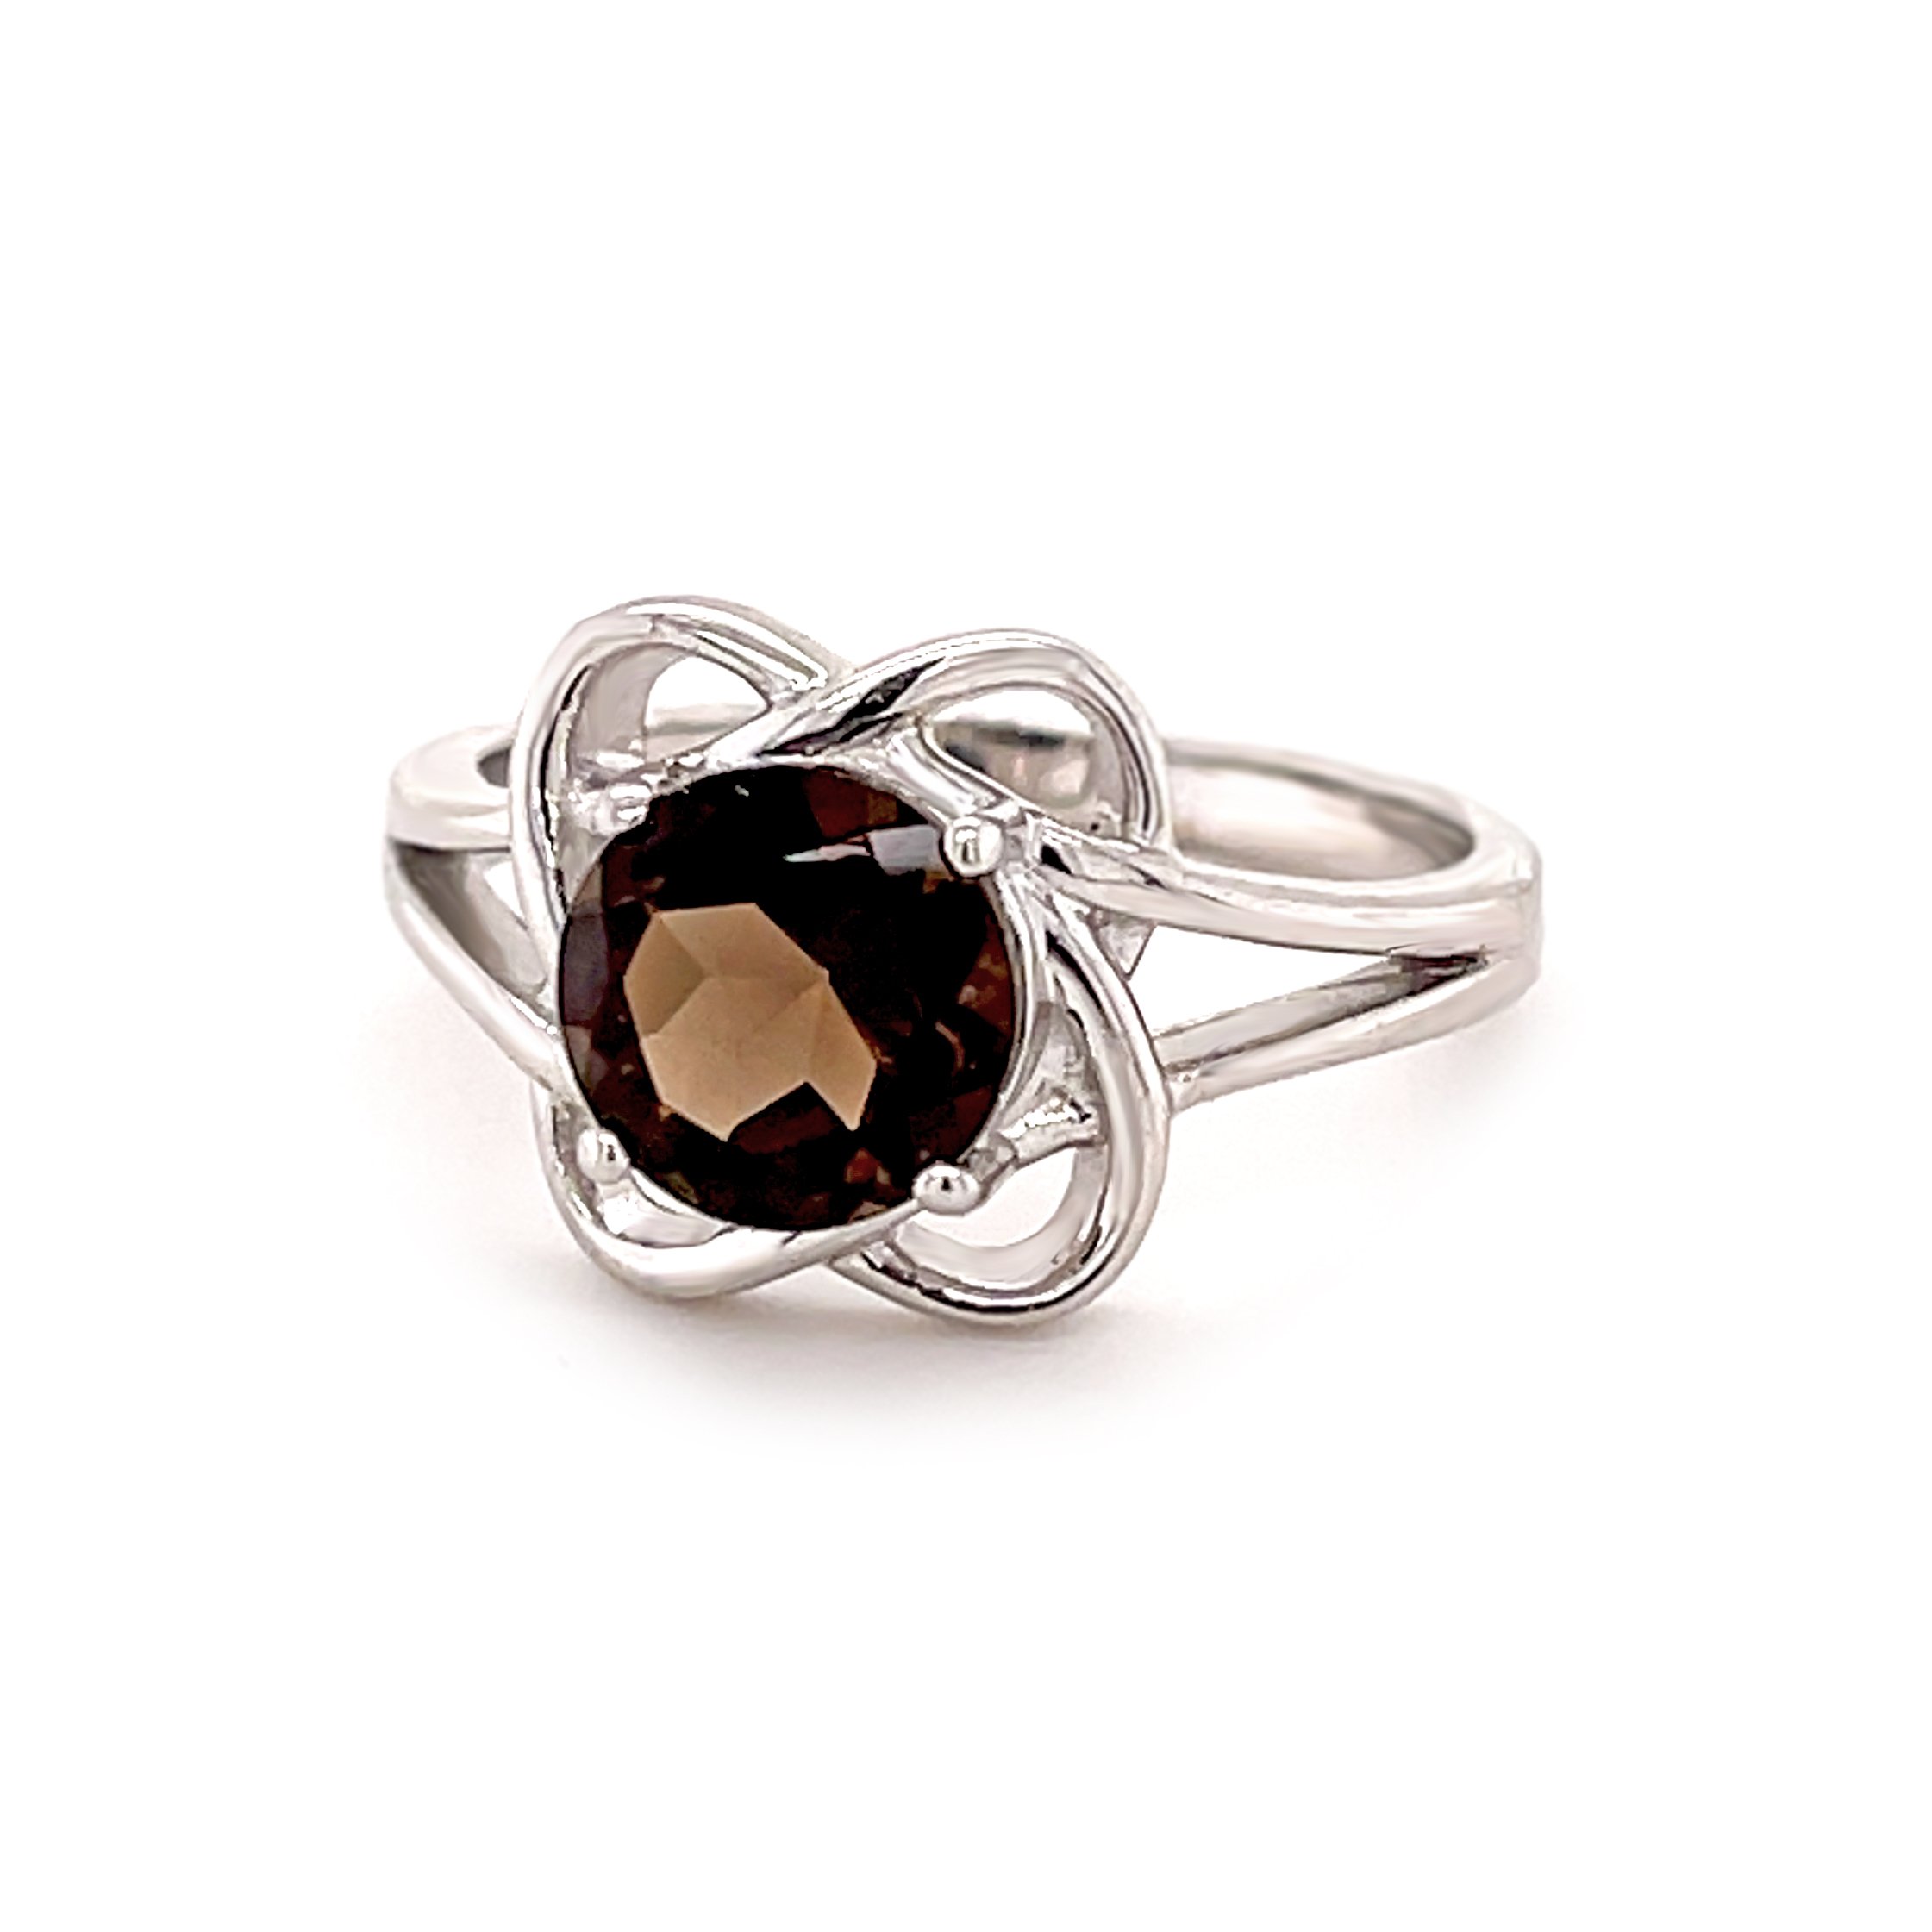 Smoky Quartz Ring Size 8 - Faceted Round With Floral Silver Wrapped Wire Bezel & Cutout Band - Prong Set